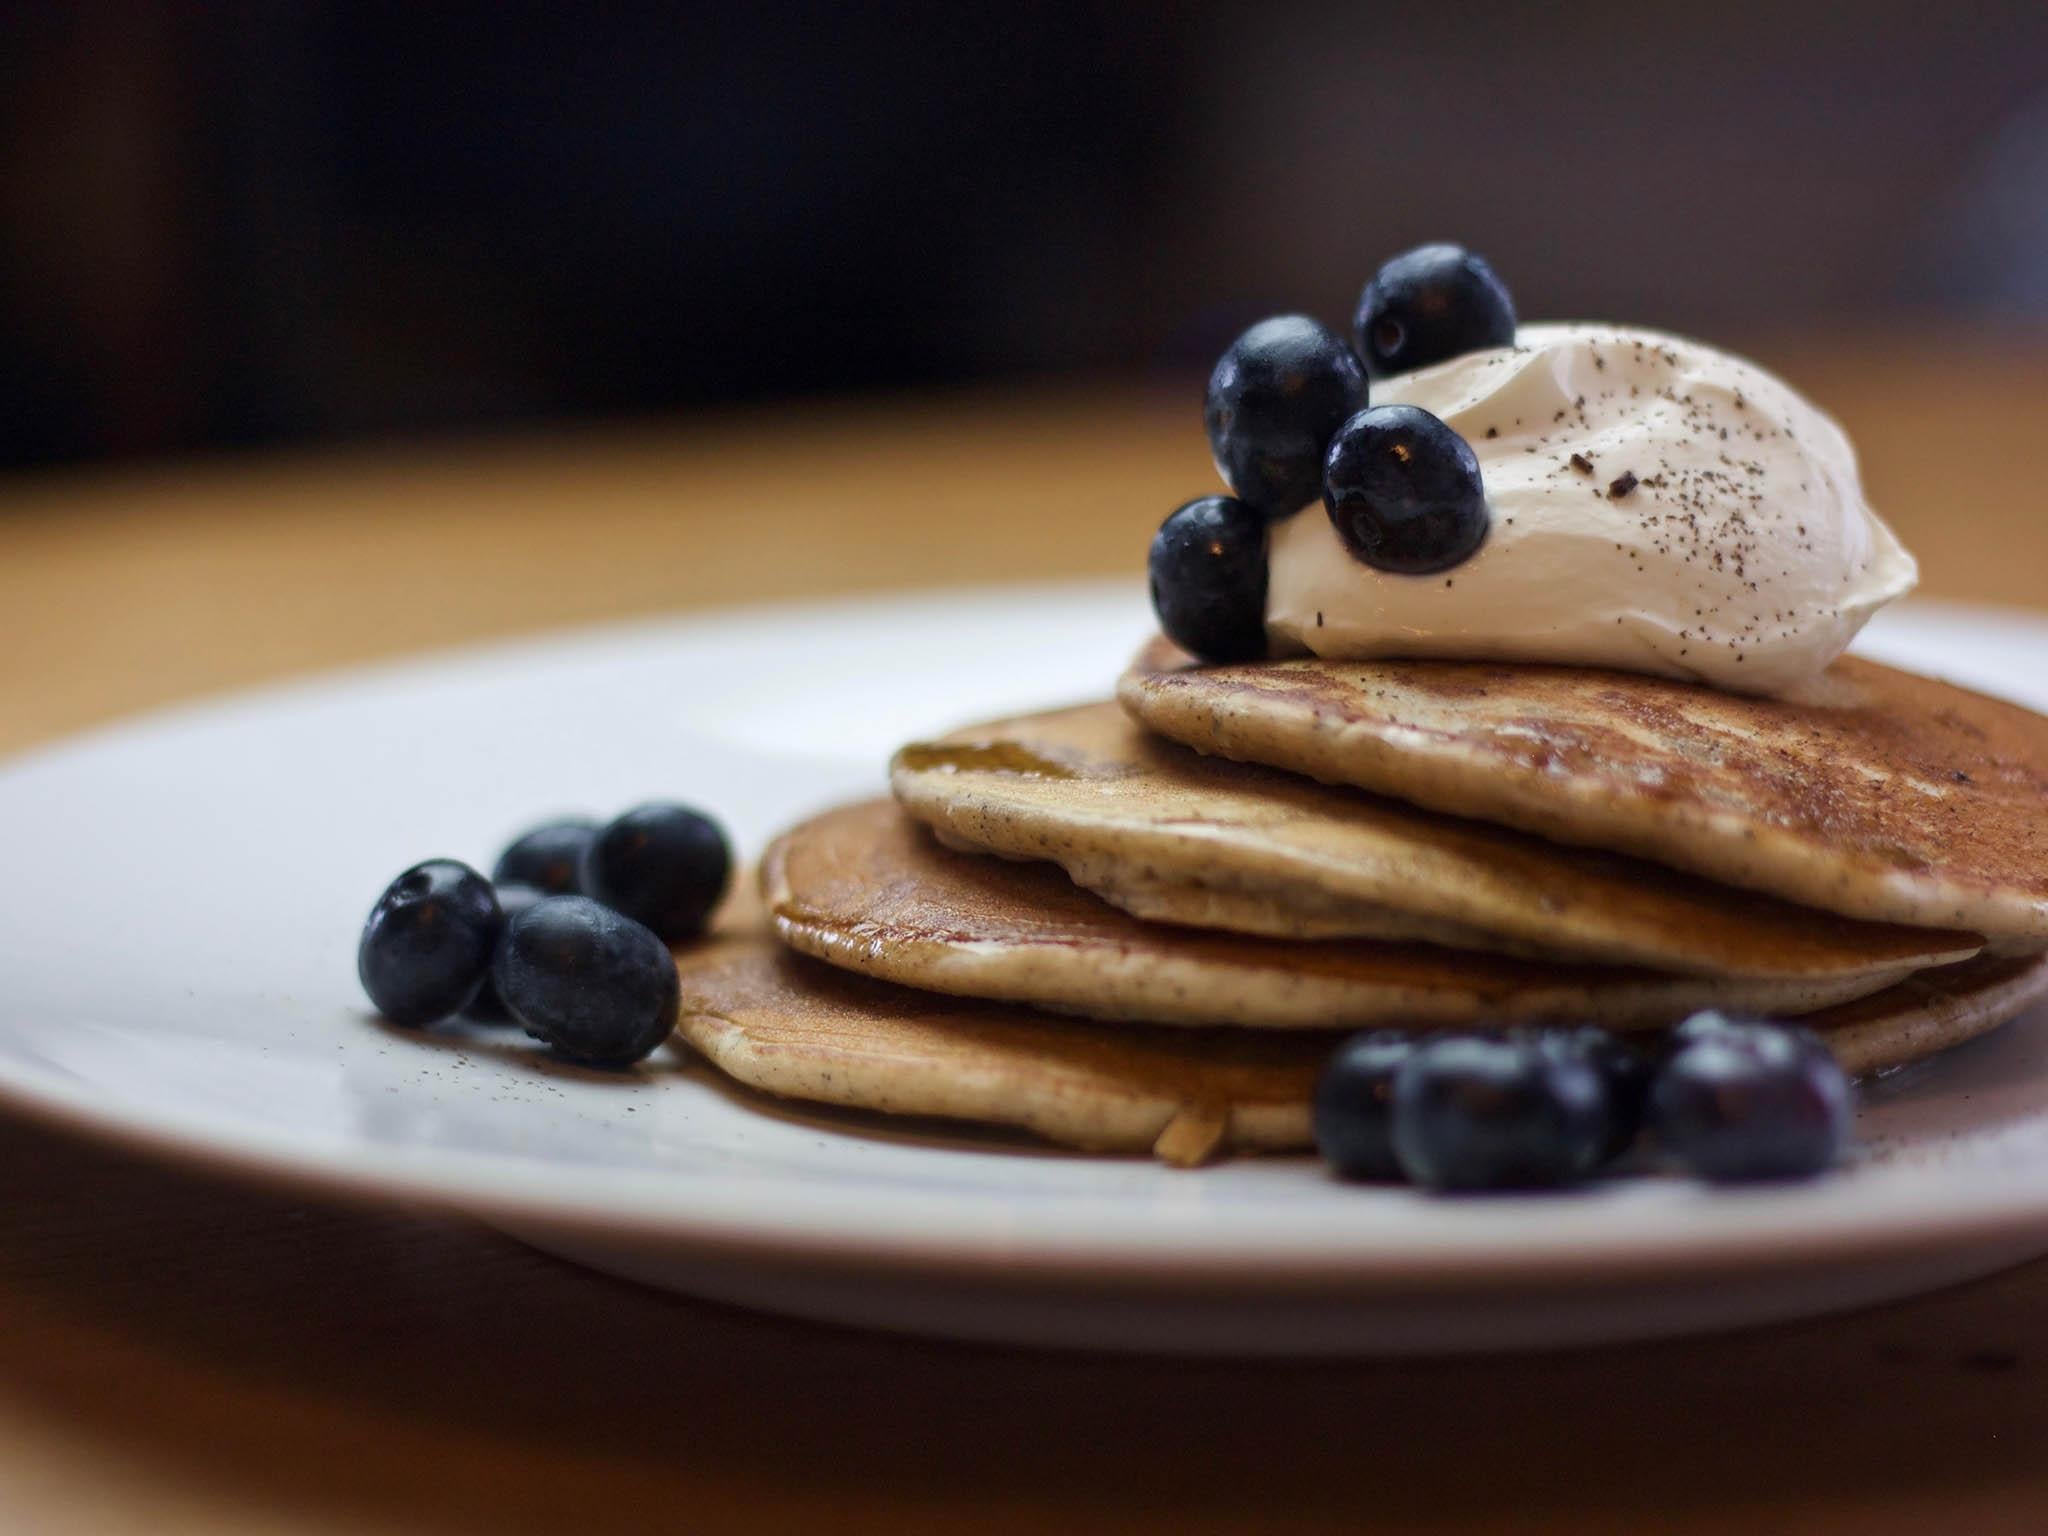 Pancakes infused with Japanese smoked green tea is one of the highlights on the menu